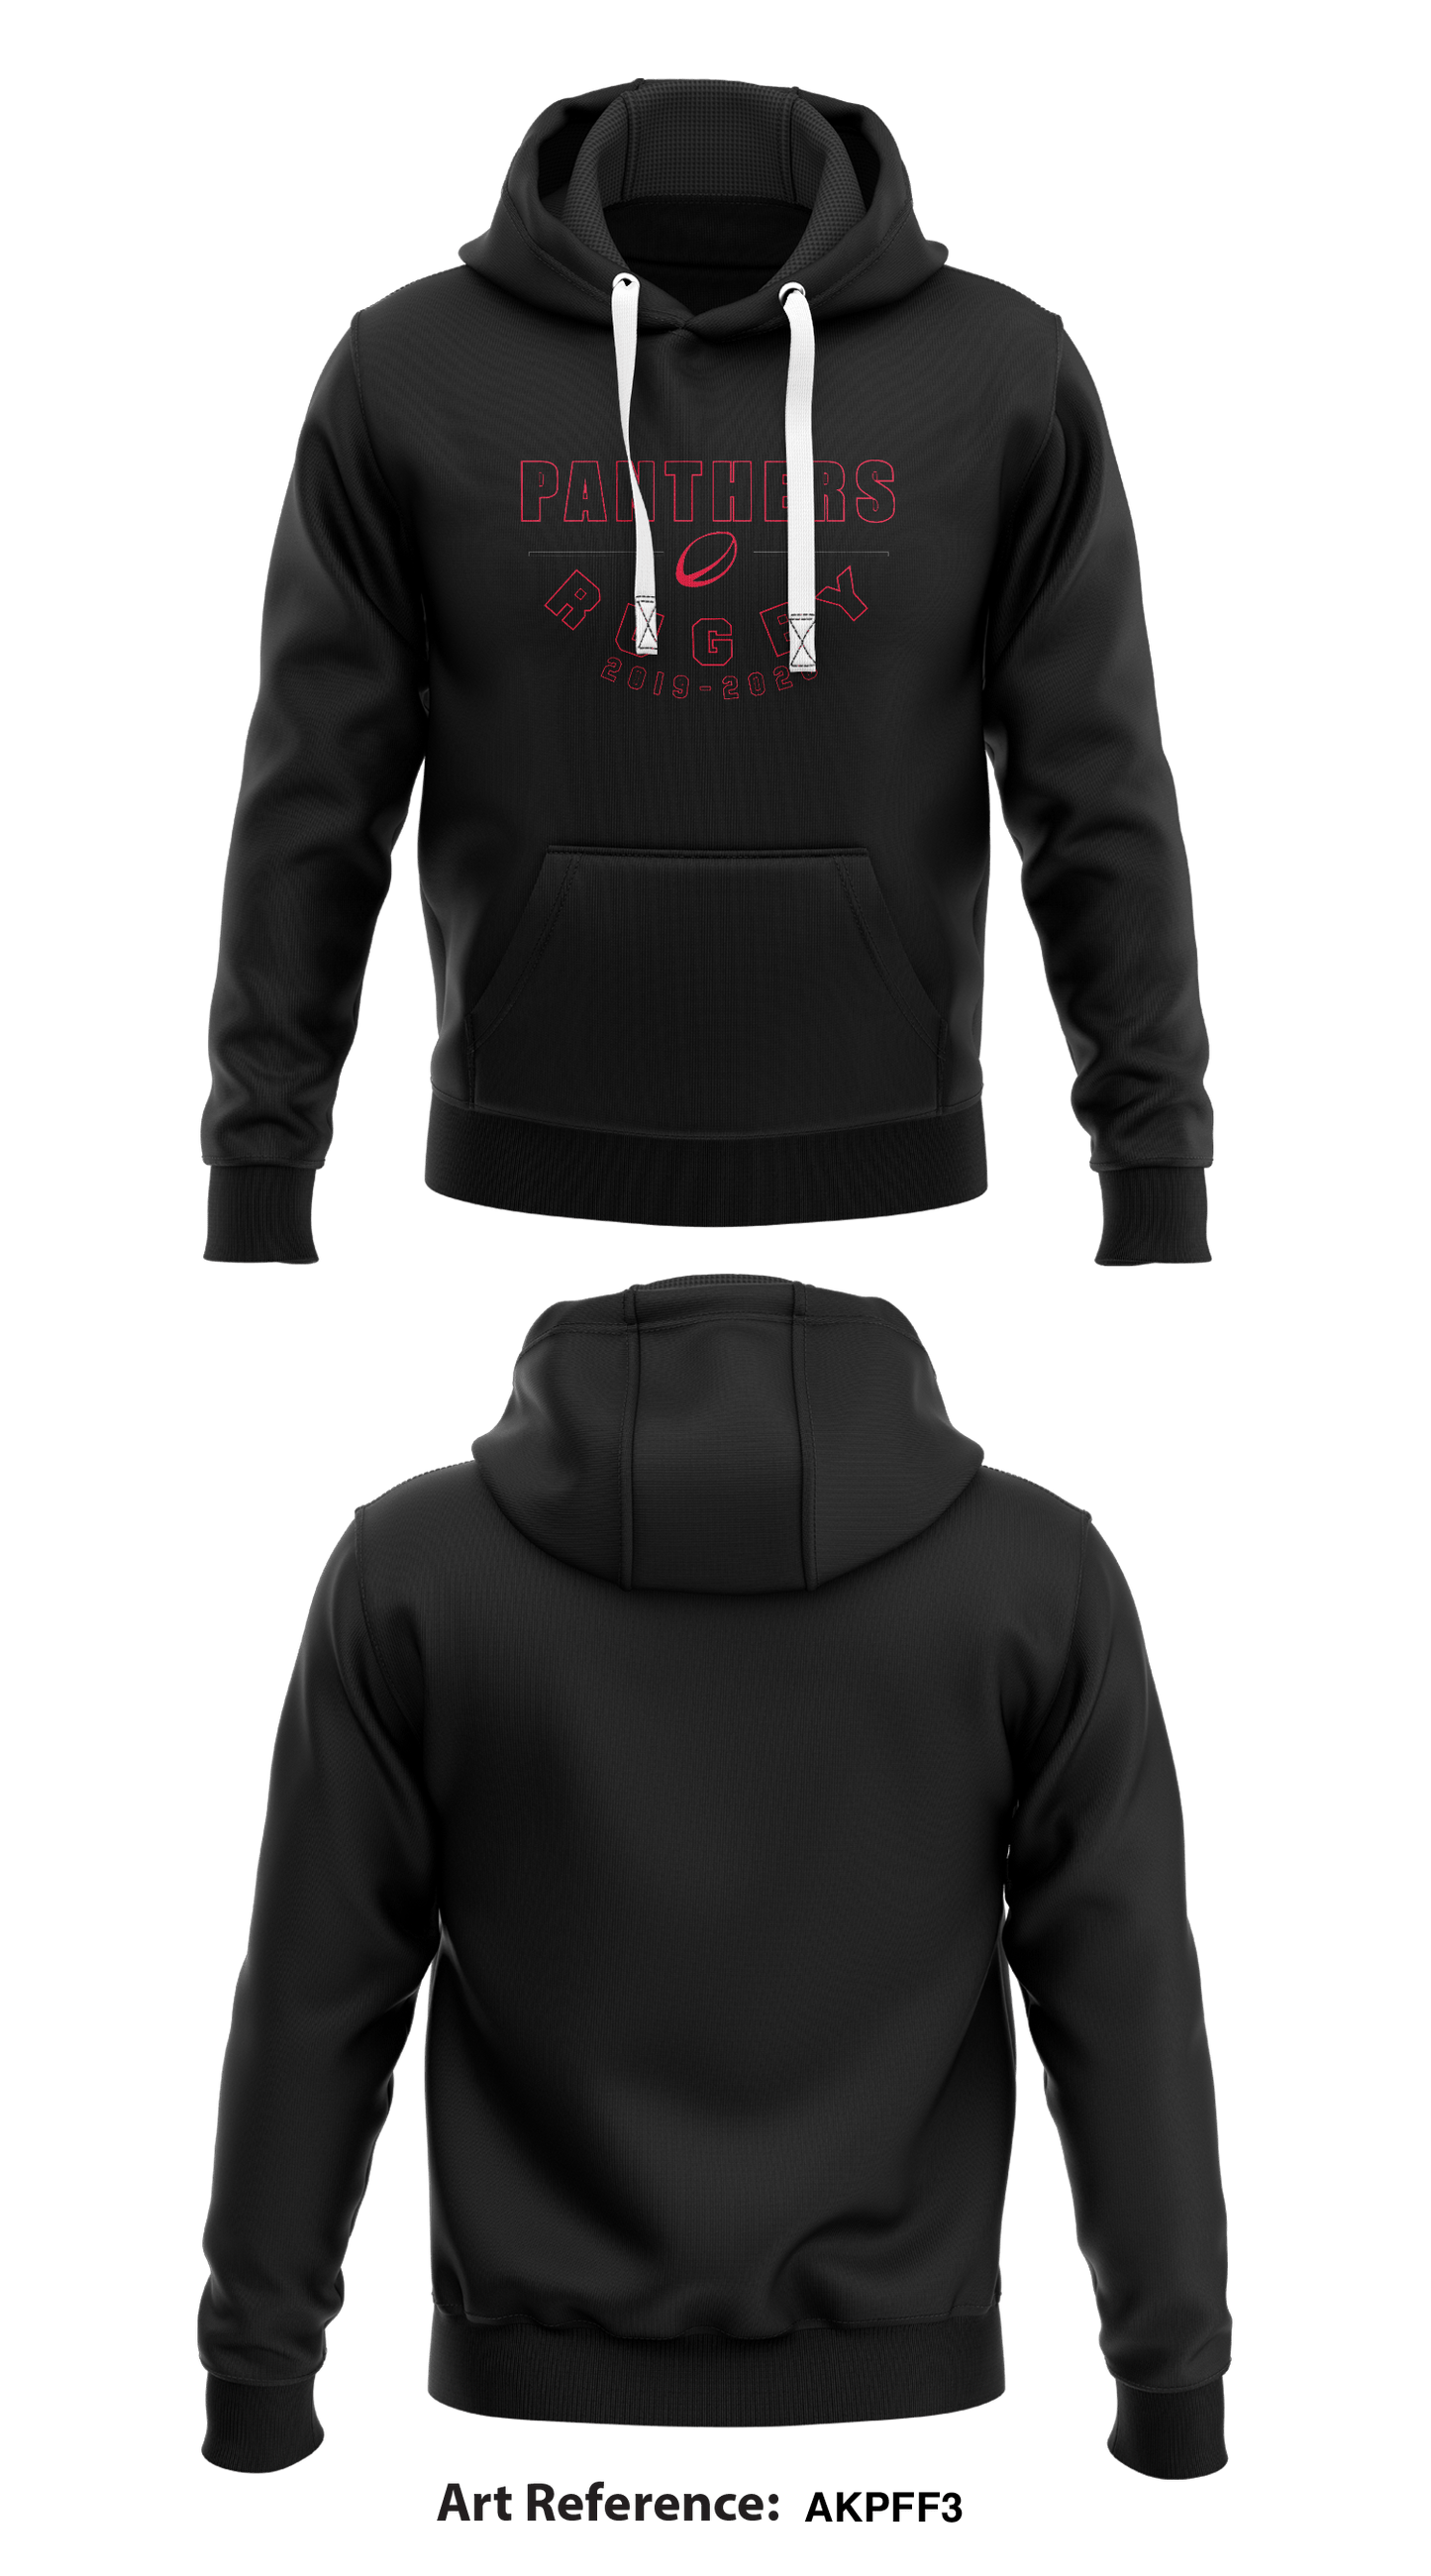 Victoria Park Panther Store 1  Core Men's Hooded Performance Sweatshirt - akpFF3